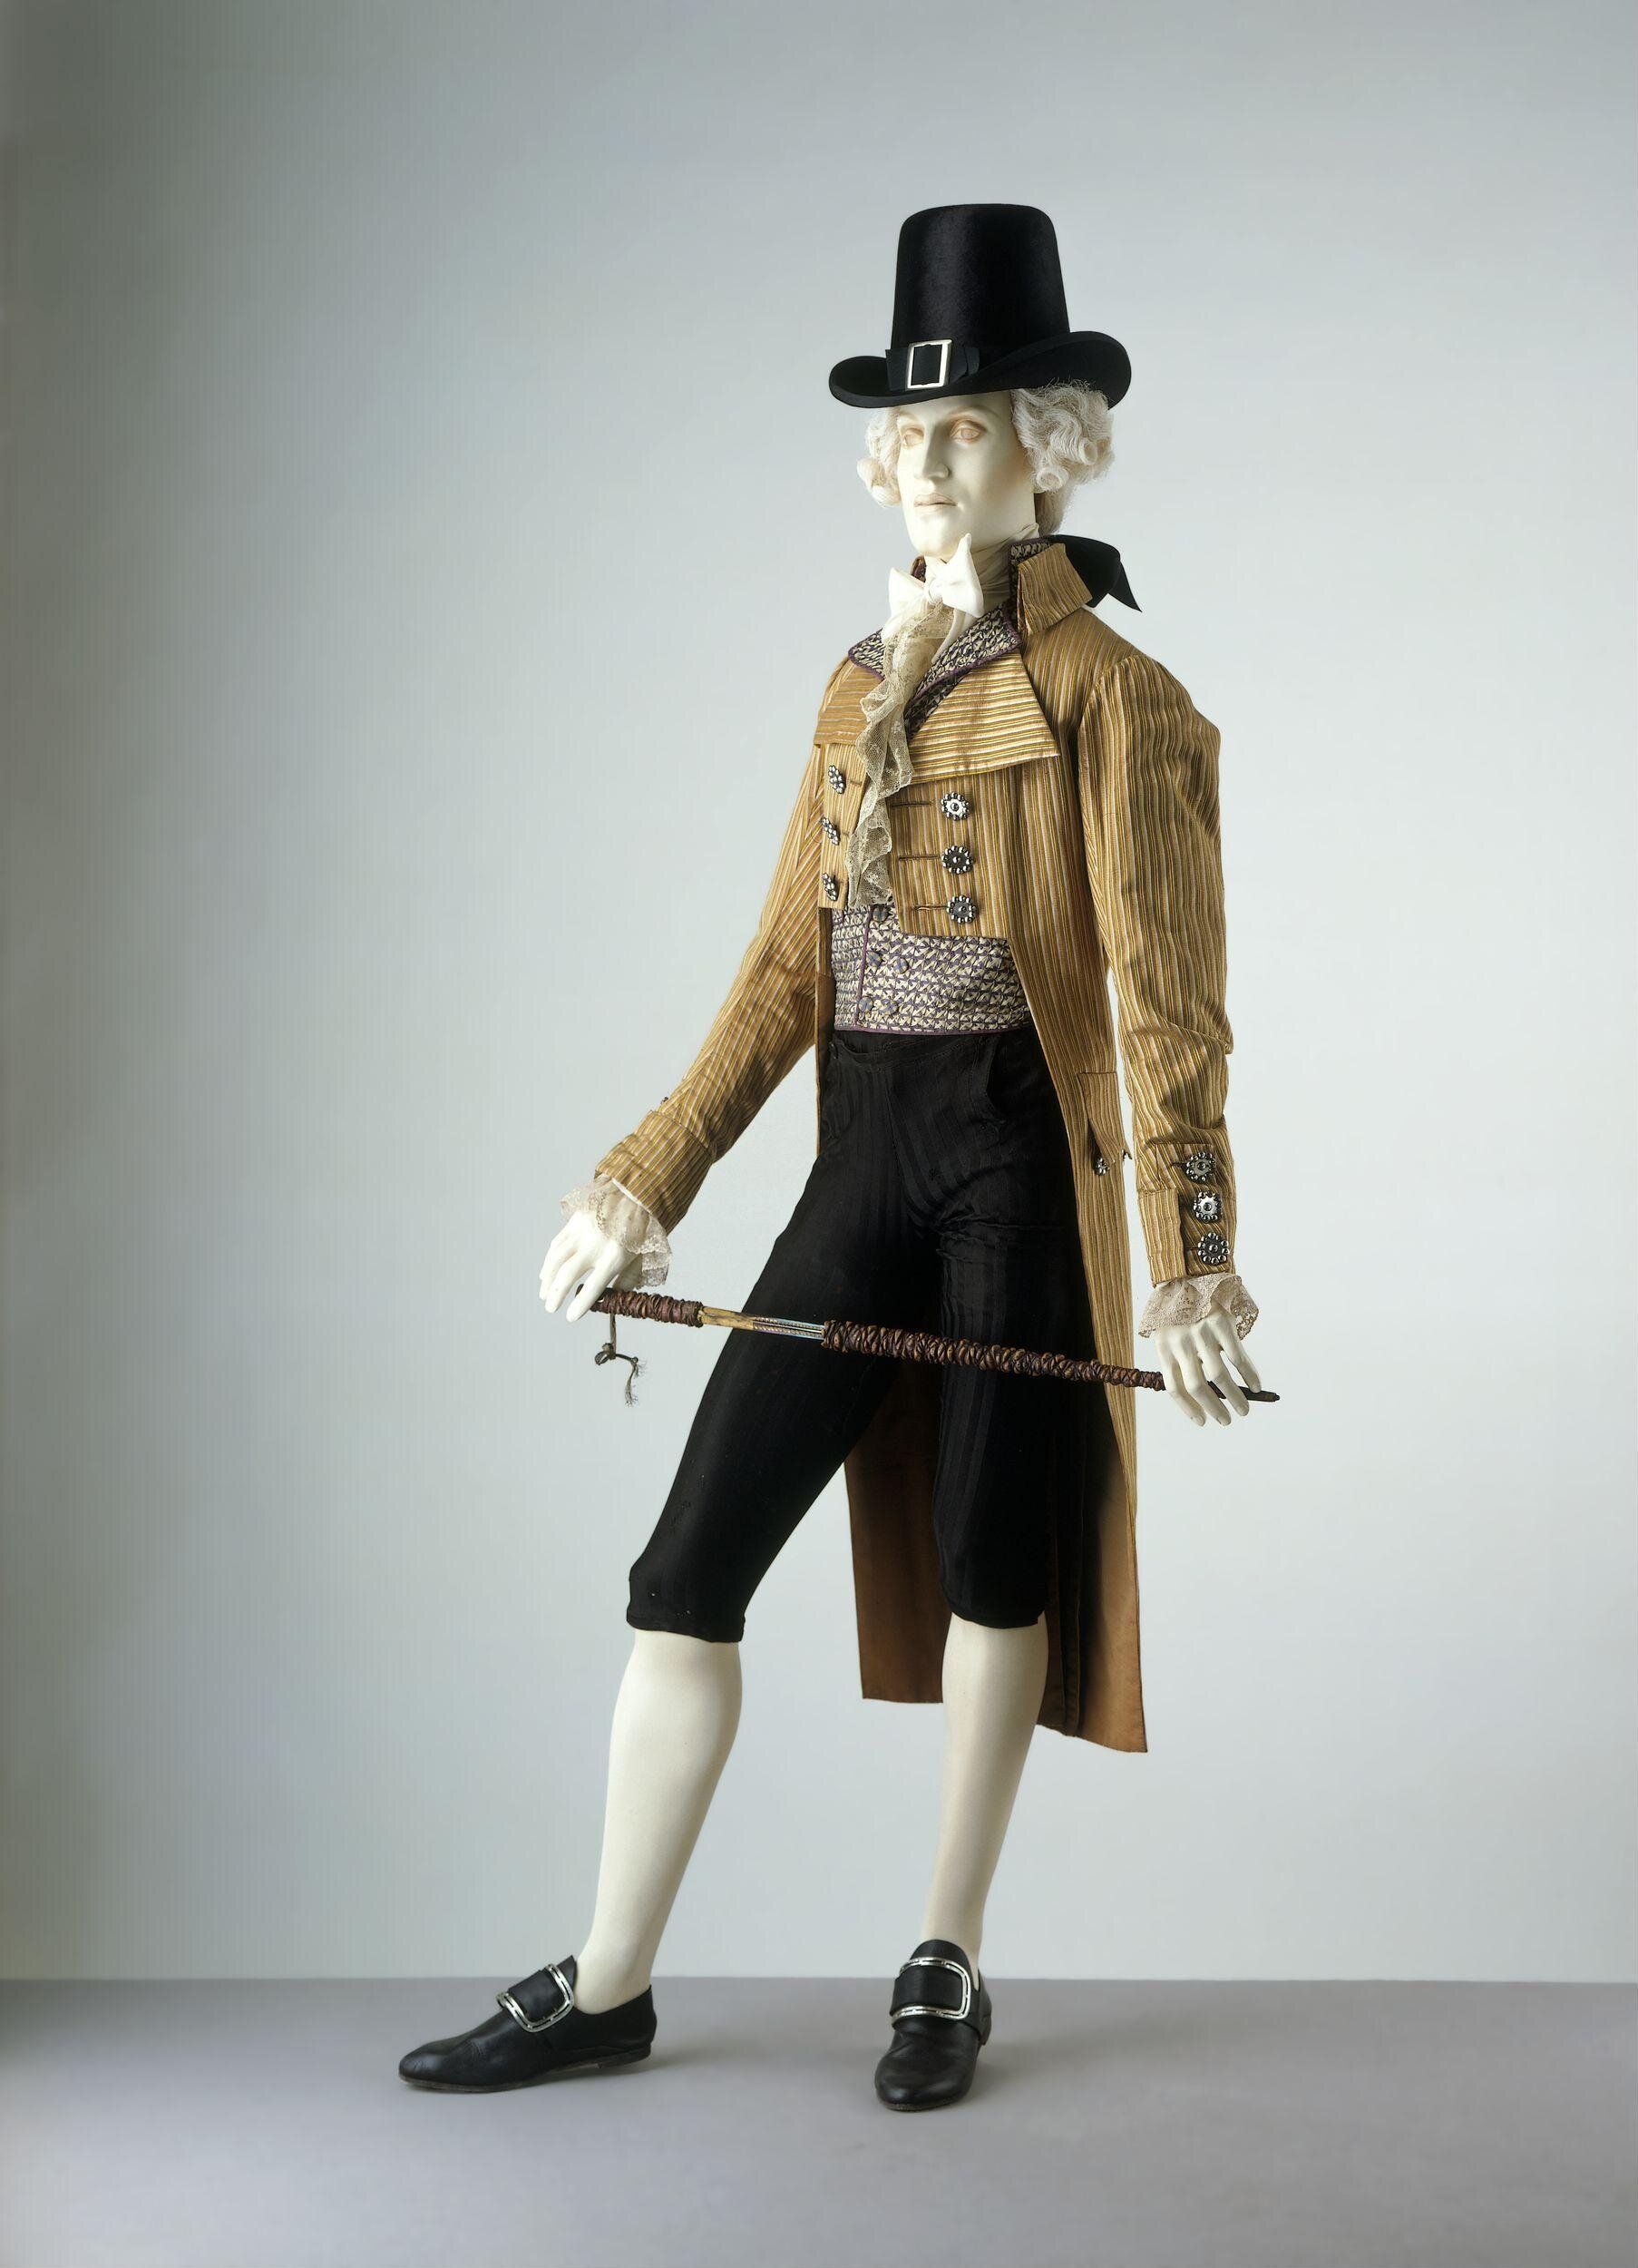 Cut steel was the perfect compliment to the exaggerated style fashionable in the late 1790s. Note the large lapel. Cut steel became popular for shoe buckles and buttons in the 1750s. It was a fraction of the price of paste. Coat, 1795-1805. The Victoria & Albert Museum.   